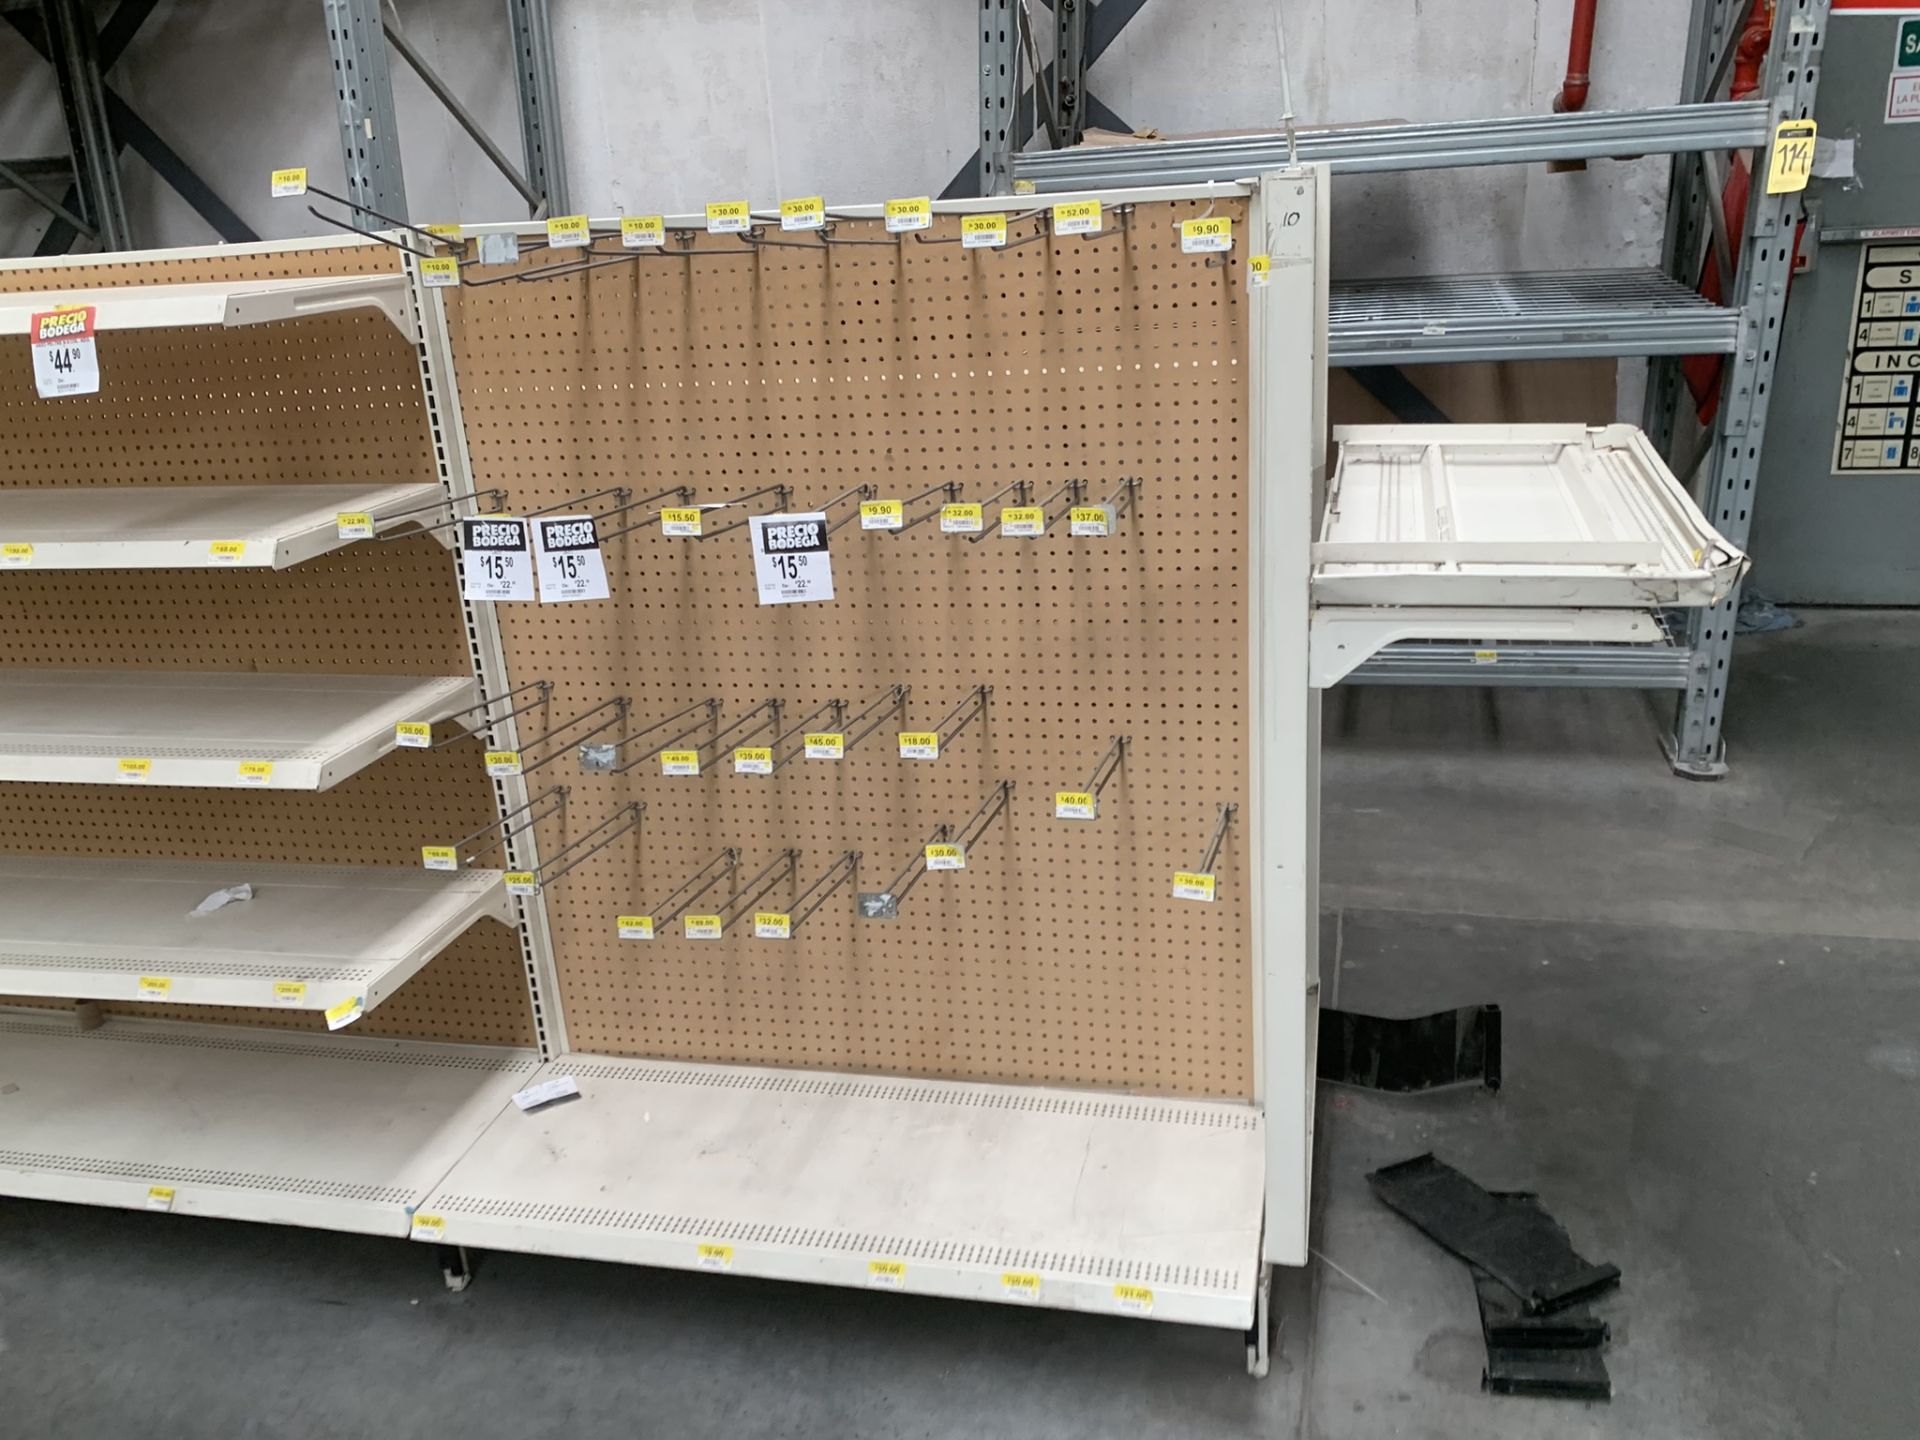 2 gondola-type display cabinet measures 3.80 x 0.91 x 1.55 that are made up of 10 posts and 37 trays - Image 30 of 35